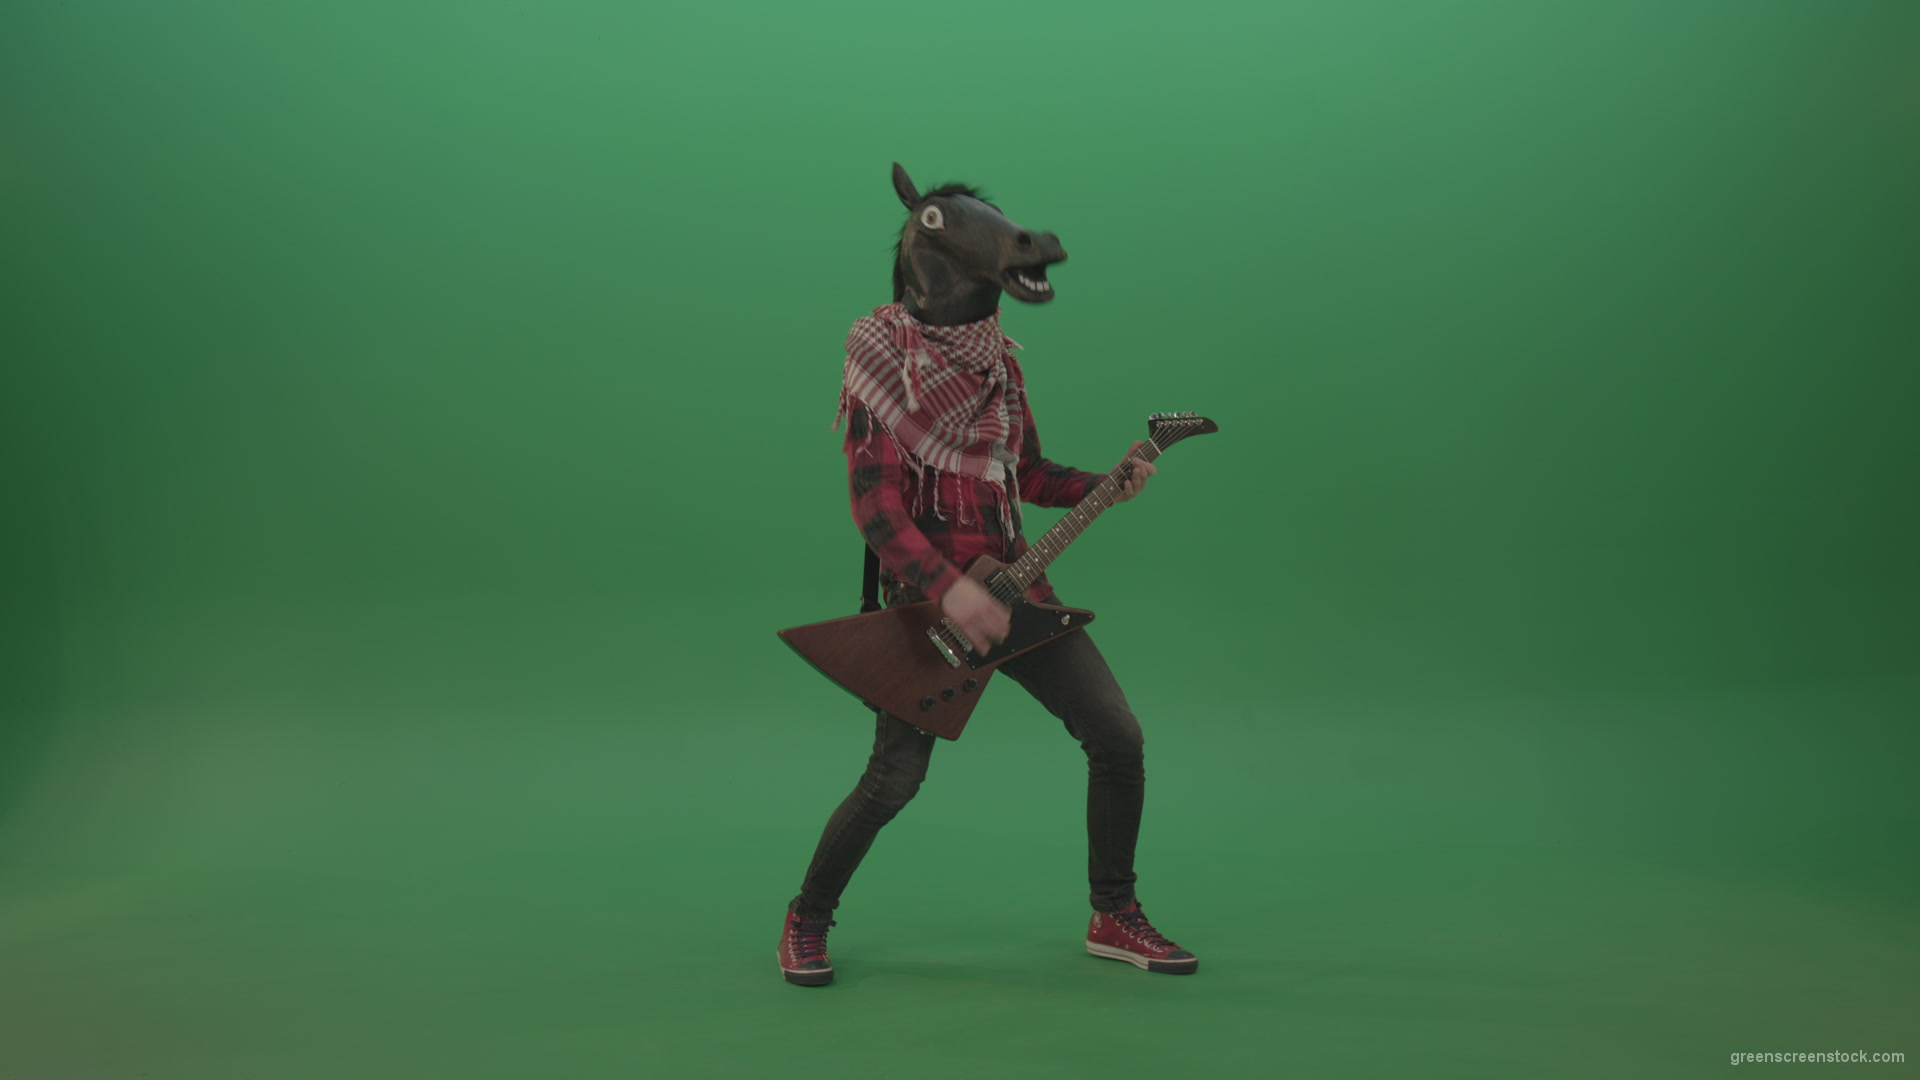 Green-screen-horse-man-guitaris-play-hard-rock-music-with-guitar-isolated-on-green-background_007 Green Screen Stock